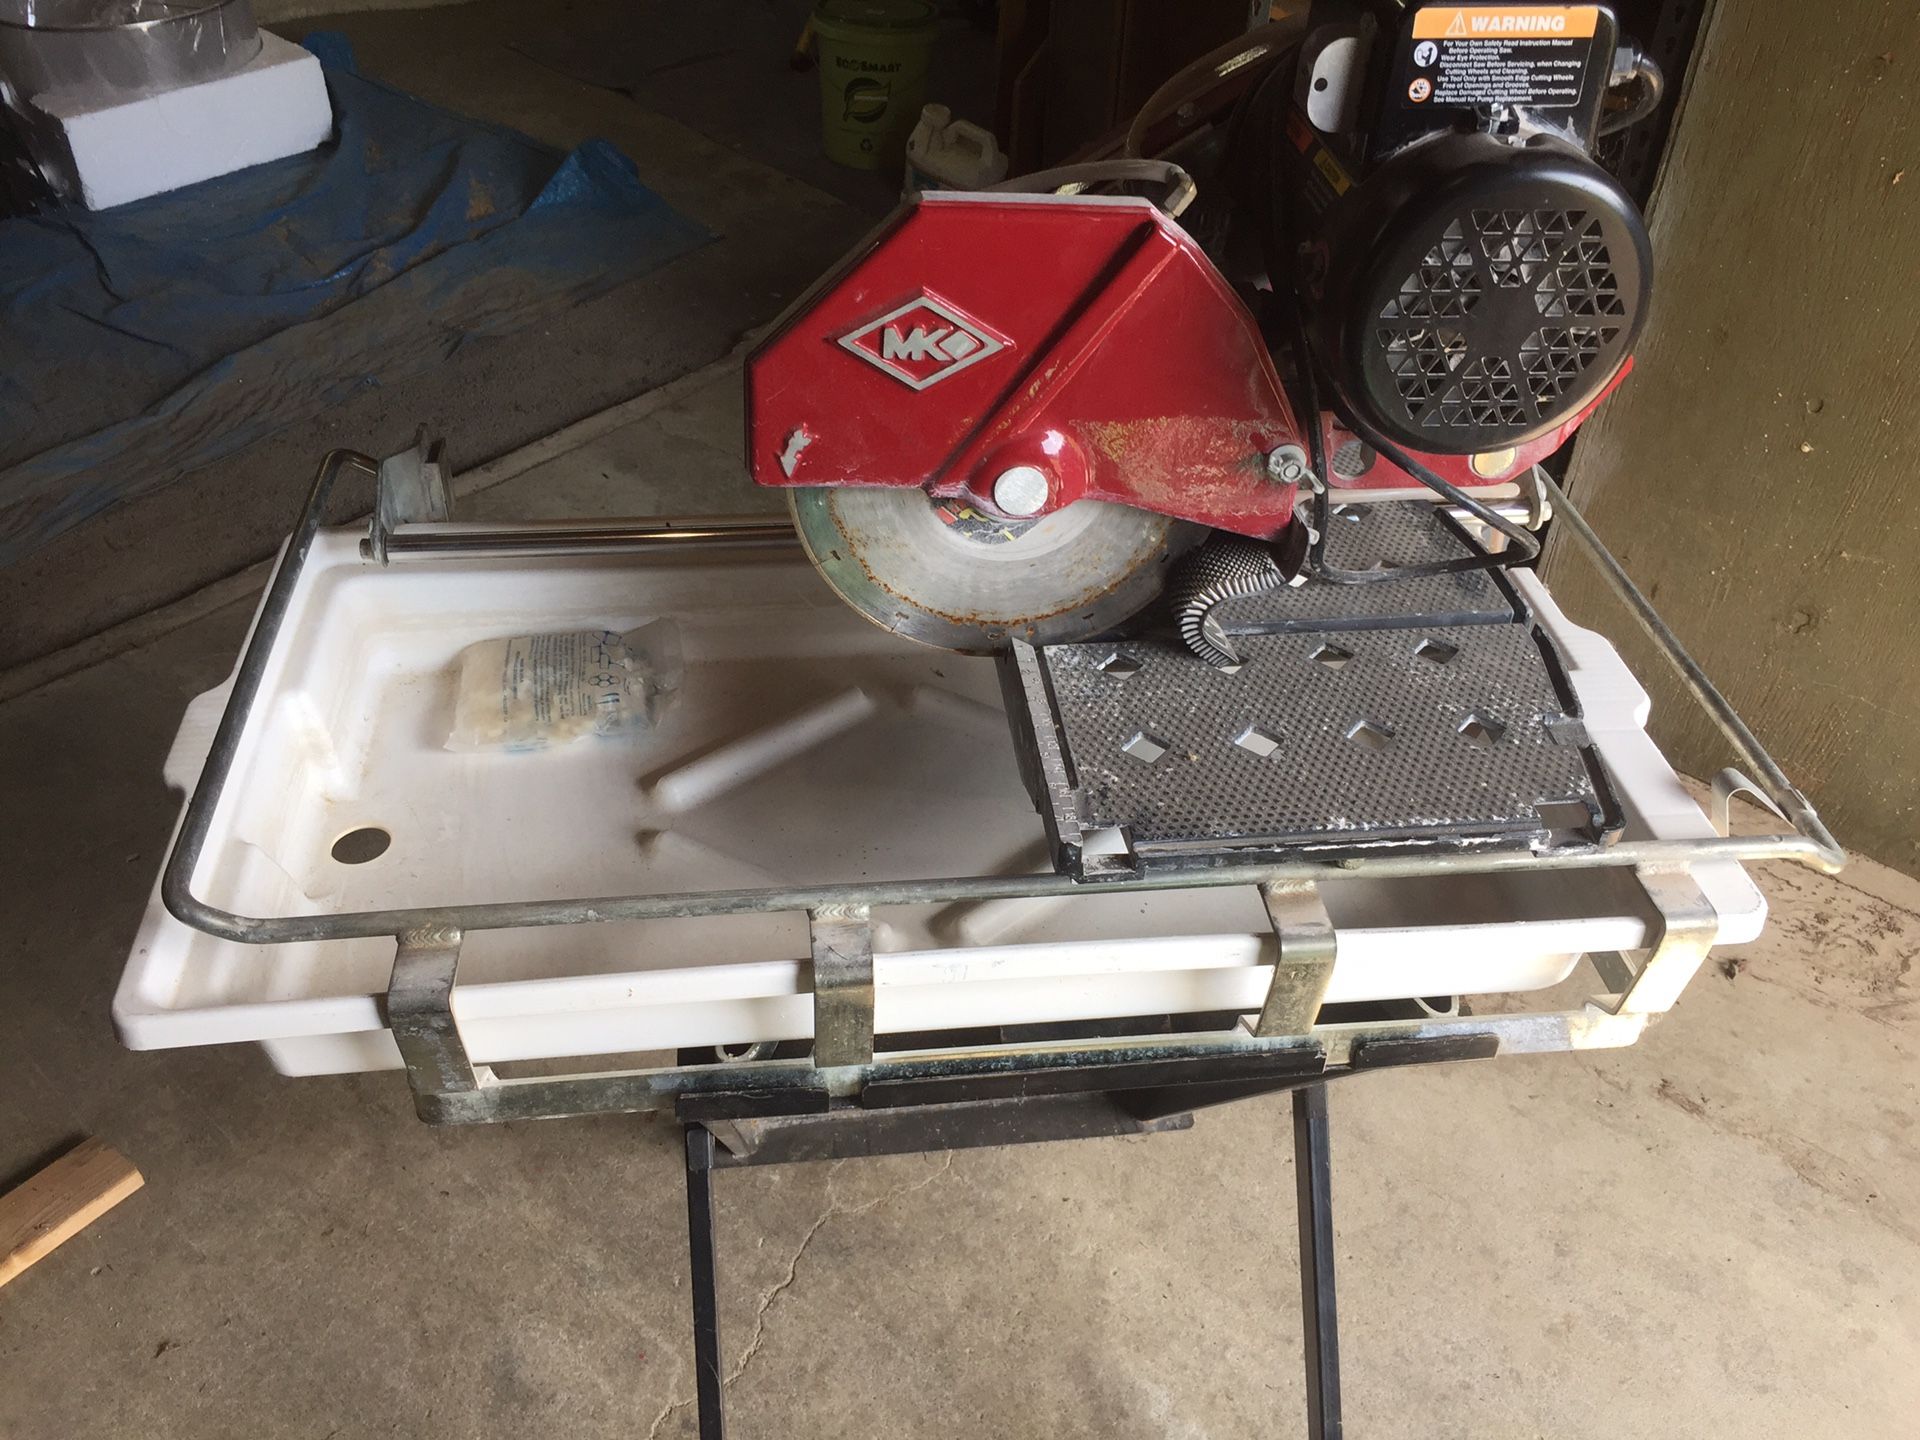 MK Diamond MK-100 10 inch table saw with stand